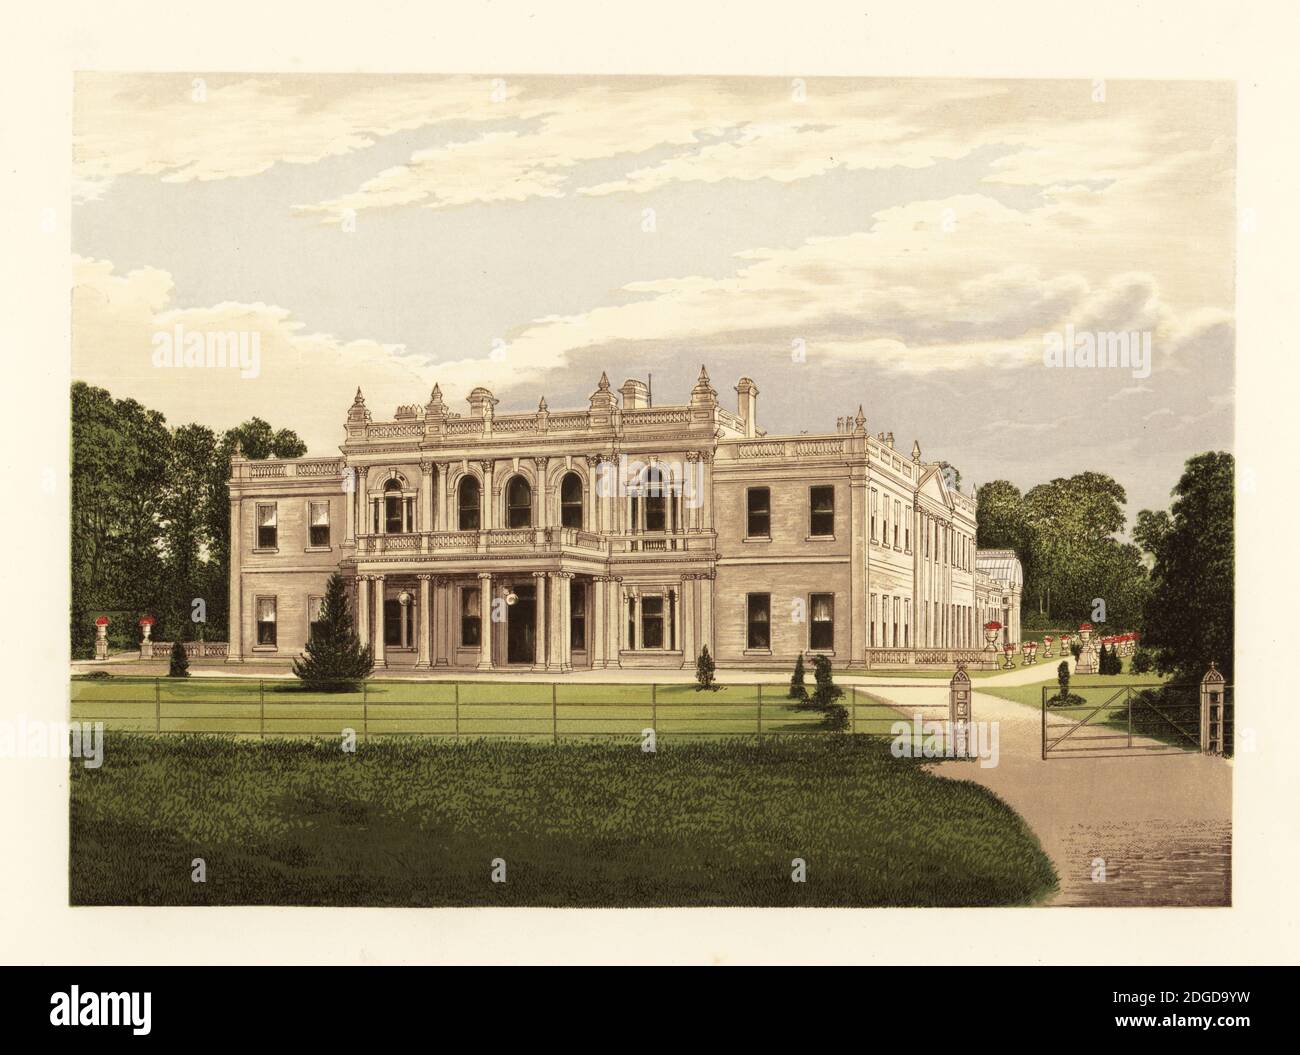 Rolleston Hall, Staffordshire, England. House occupied since the reign of Henry III, 13th century, destroyed by fire in 1871, and rebuilt soon after by Sir Tonman Mosley, 3rd Baronet, ancestor of the fascist Oswald Mosley. Colour woodblock by Benjamin Fawcett in the Baxter process of an illustration by Alexander Francis Lydon from Reverend Francis Orpen Morris’s A Series of Picturesque Views of the Seats of Noblemen and Gentlemen of Great Britain and Ireland, William Mackenzie, London, 1880. Stock Photo